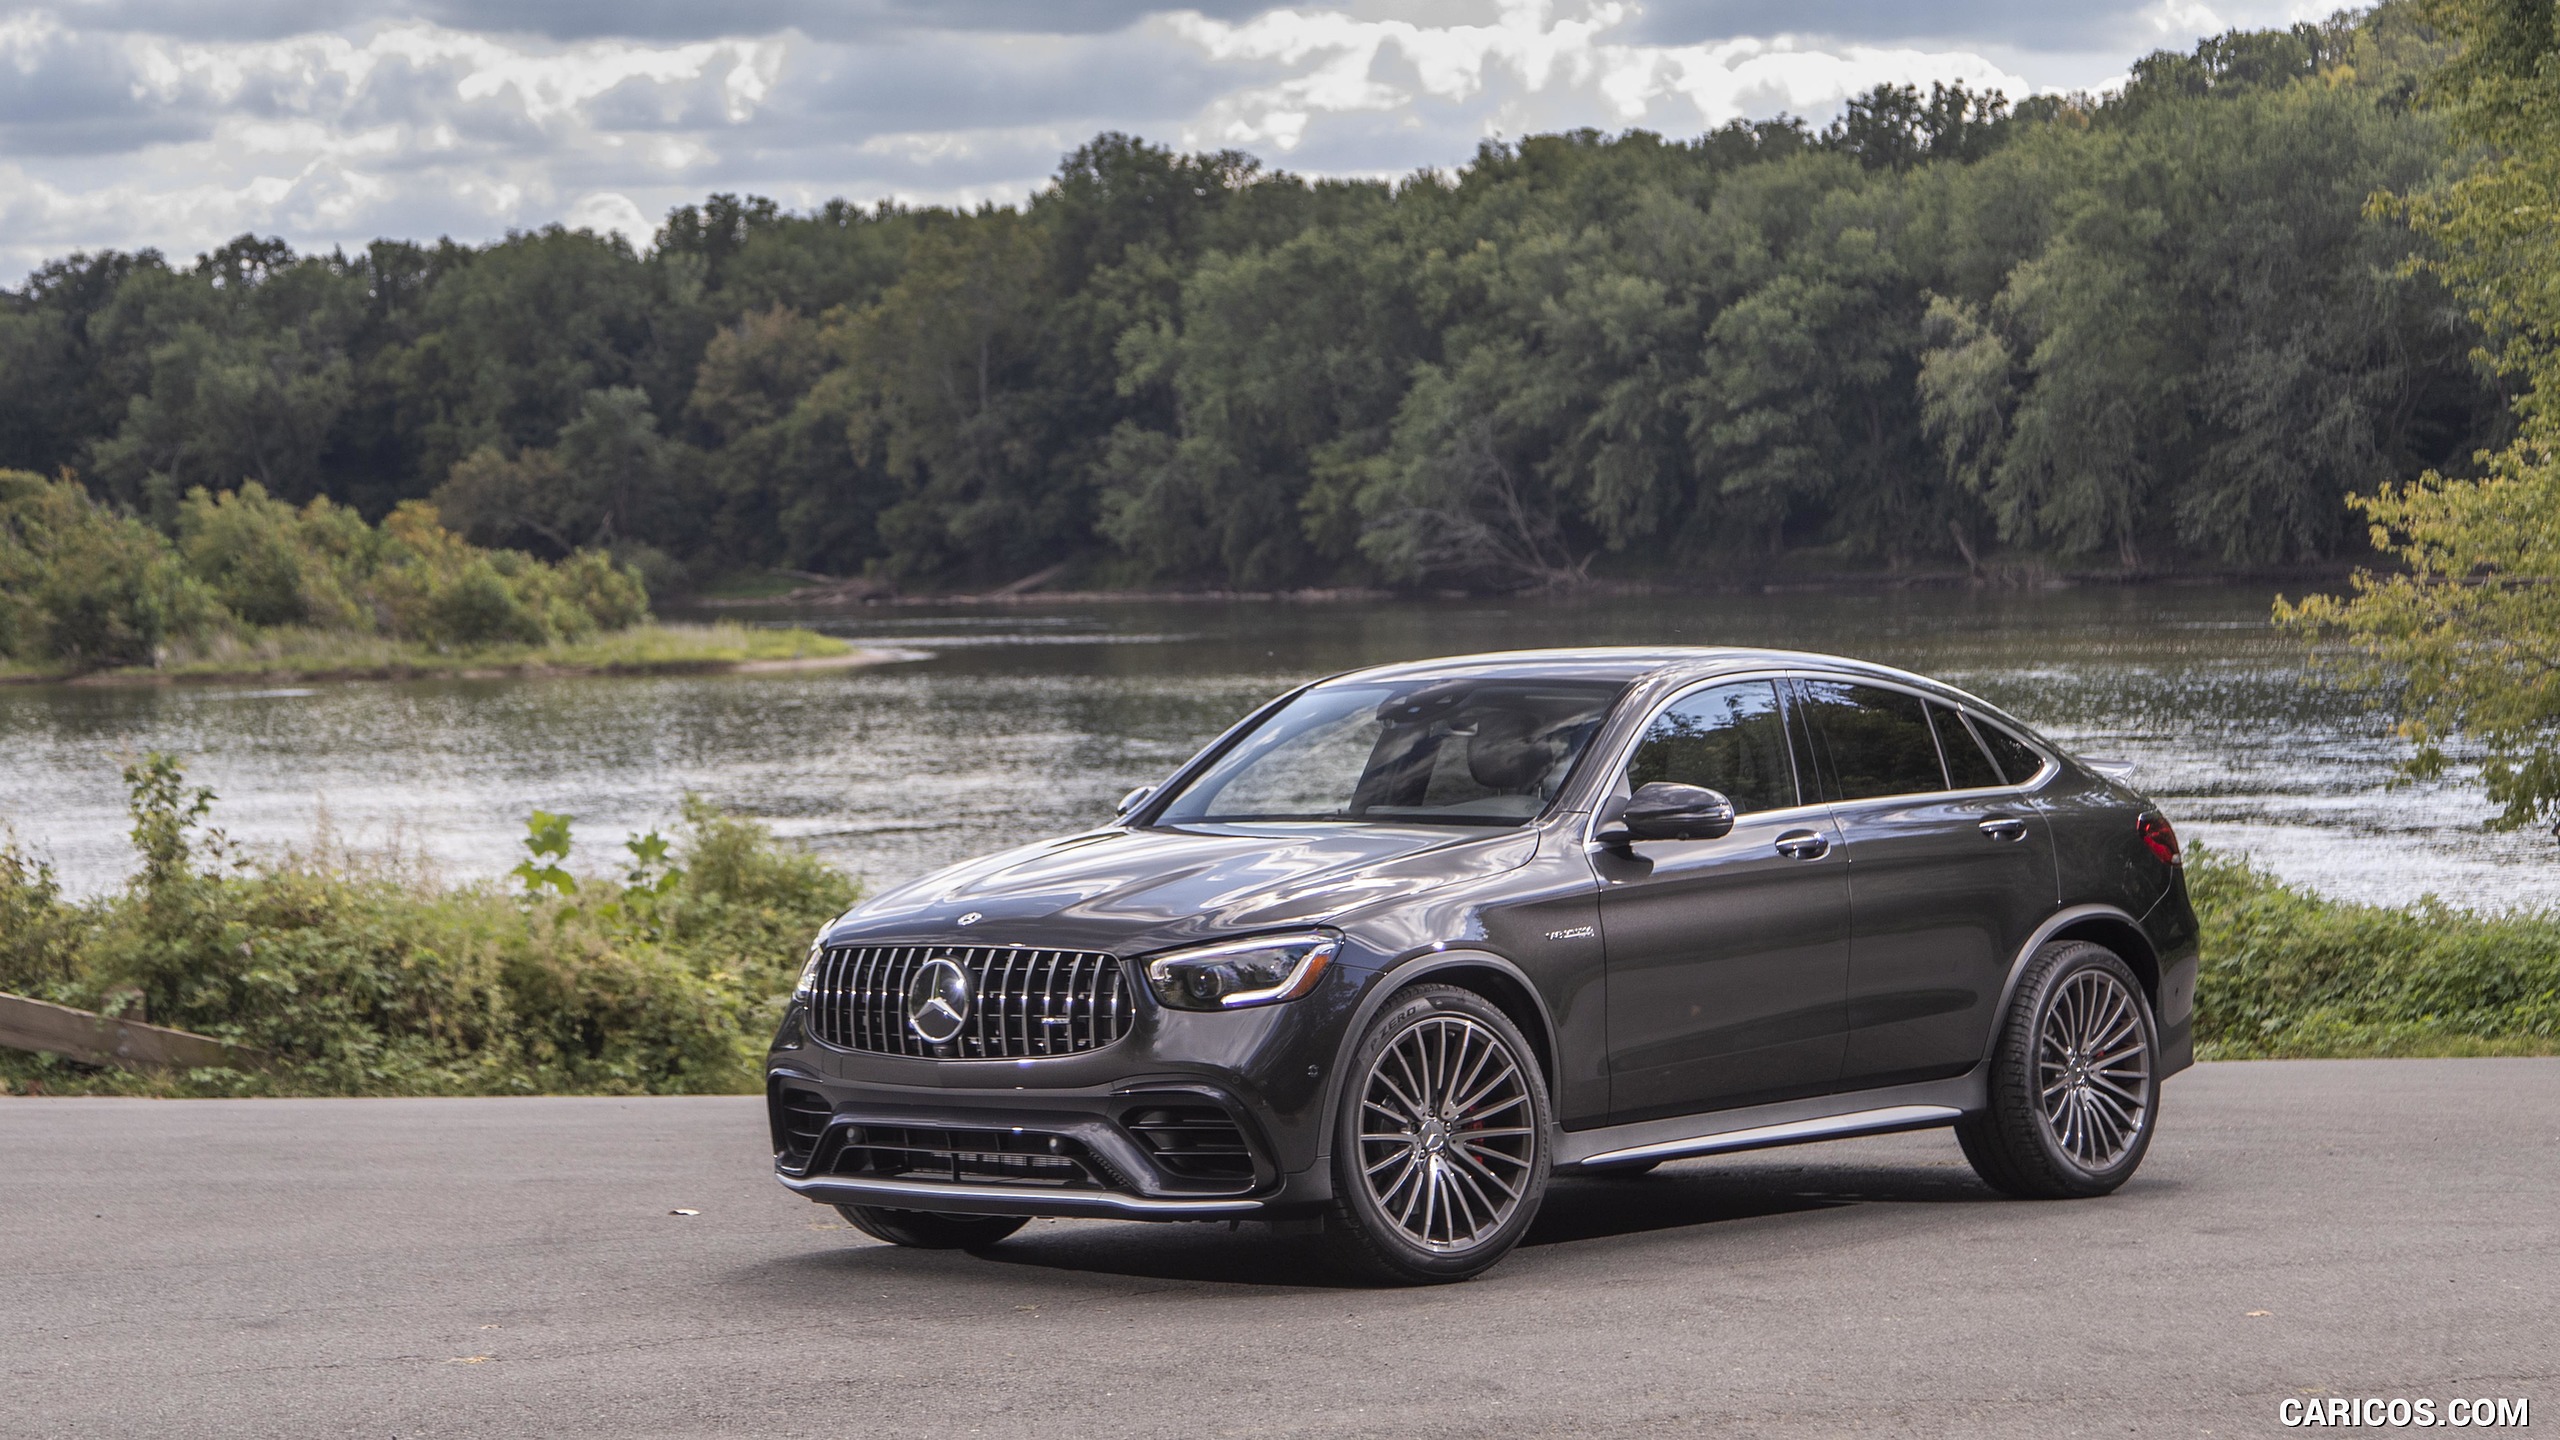 2020 Mercedes-AMG GLC 63 S Coupe (US-Spec) - Front Three-Quarter, #52 of 102